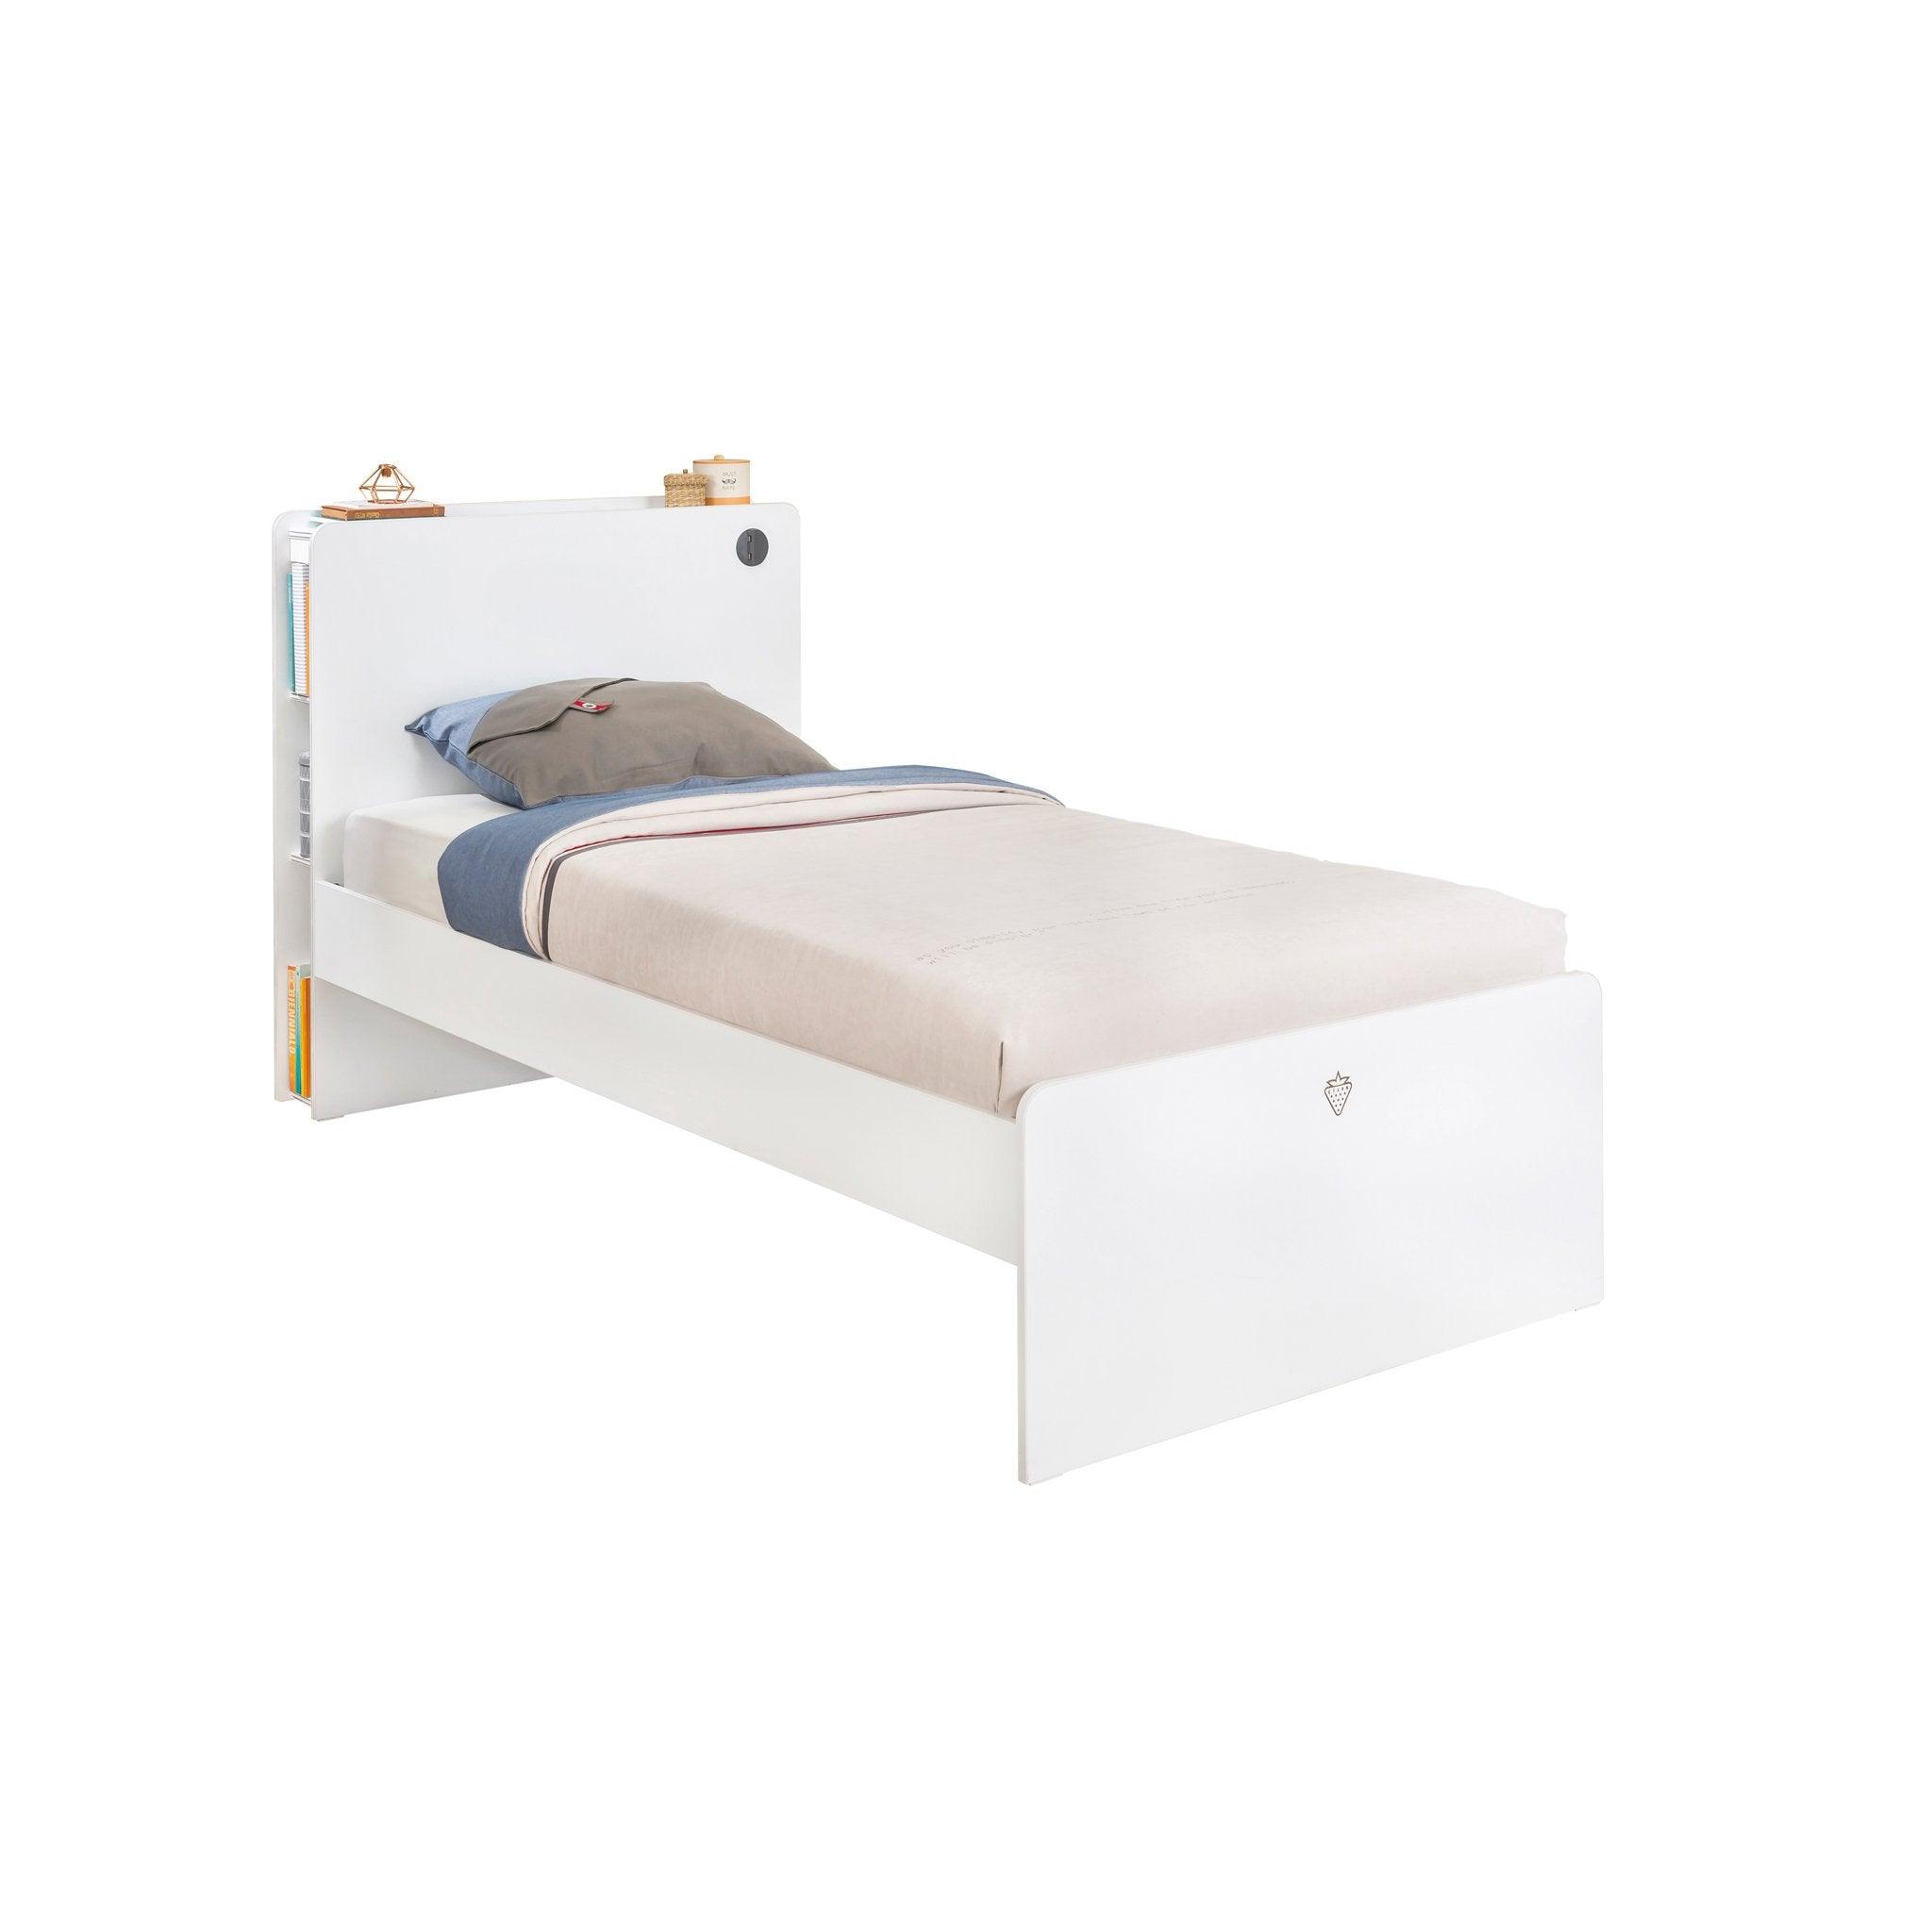 Cilek White Bed (100X200 Cm Or 120X200 Cm - With Pull Out Options)